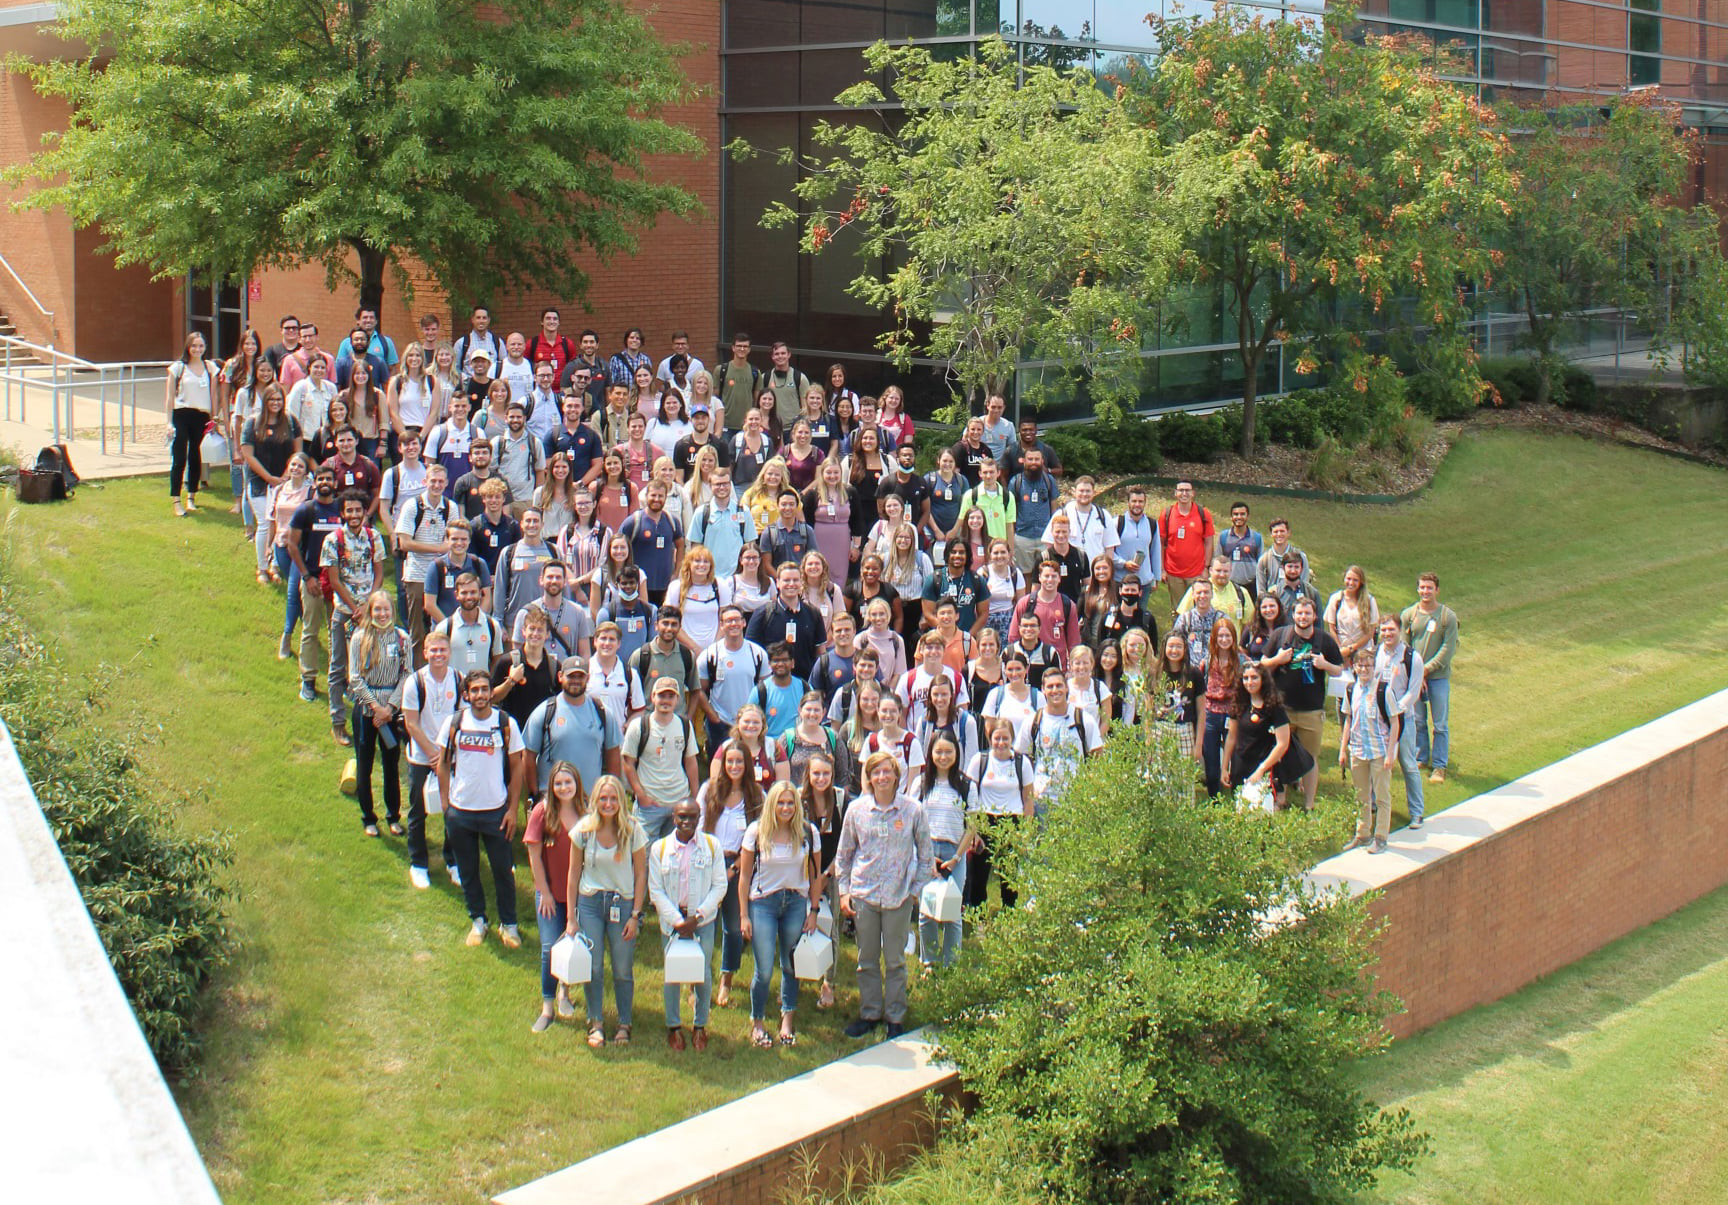 Class photo of students from the Little Rock campus during orientation week